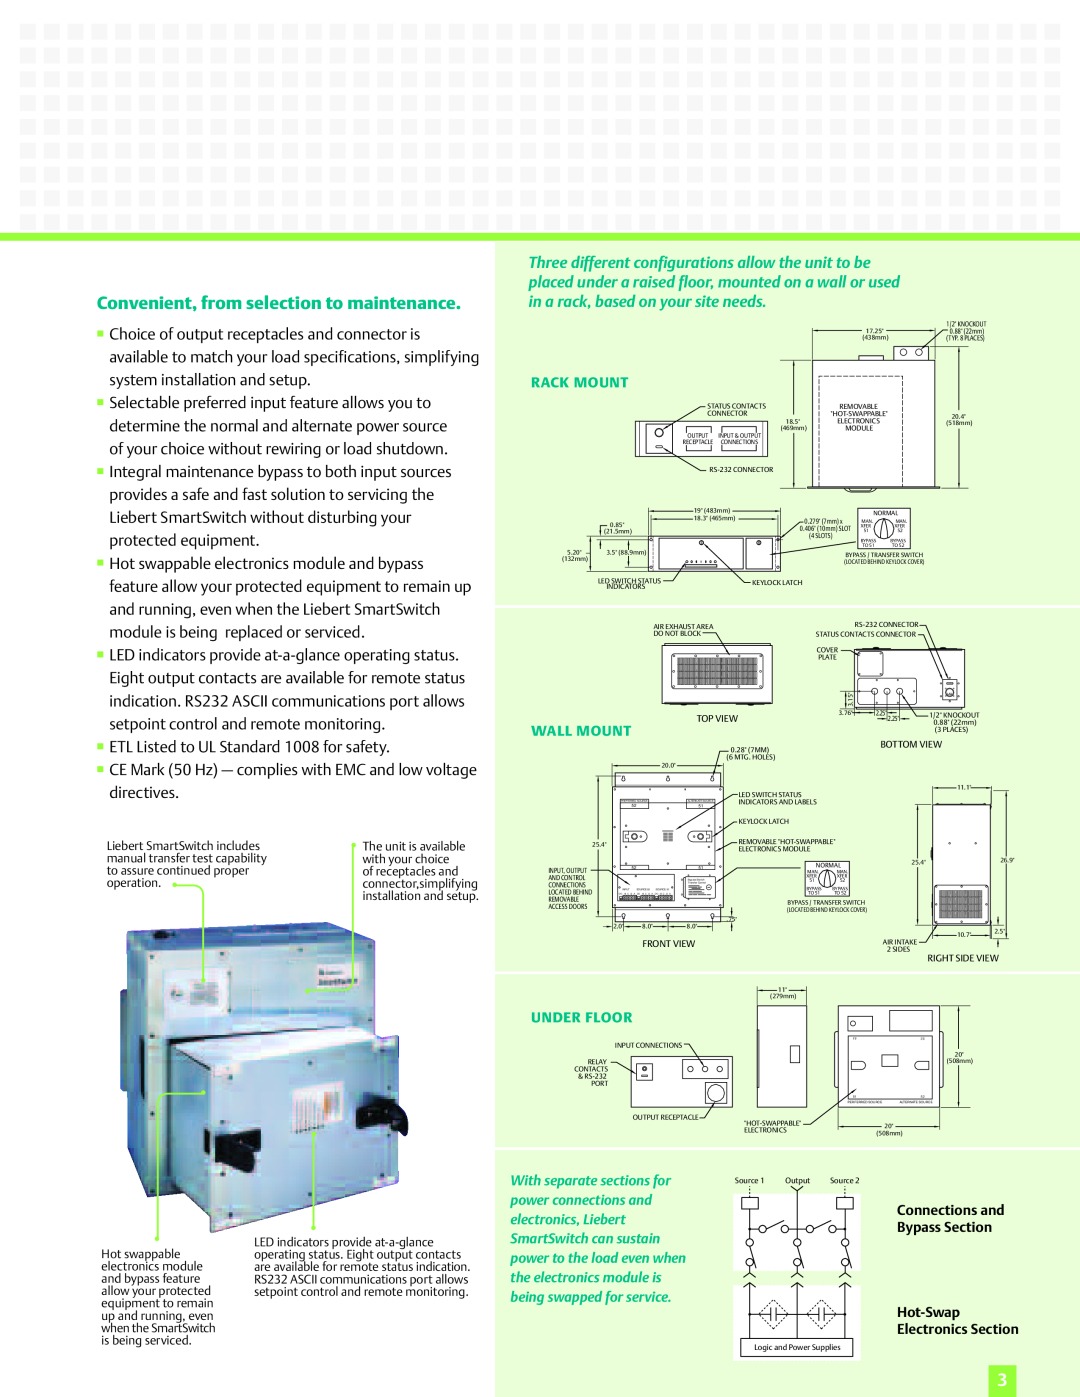 Emerson SmartSwitch manual Convenient, from selection to maintenance 